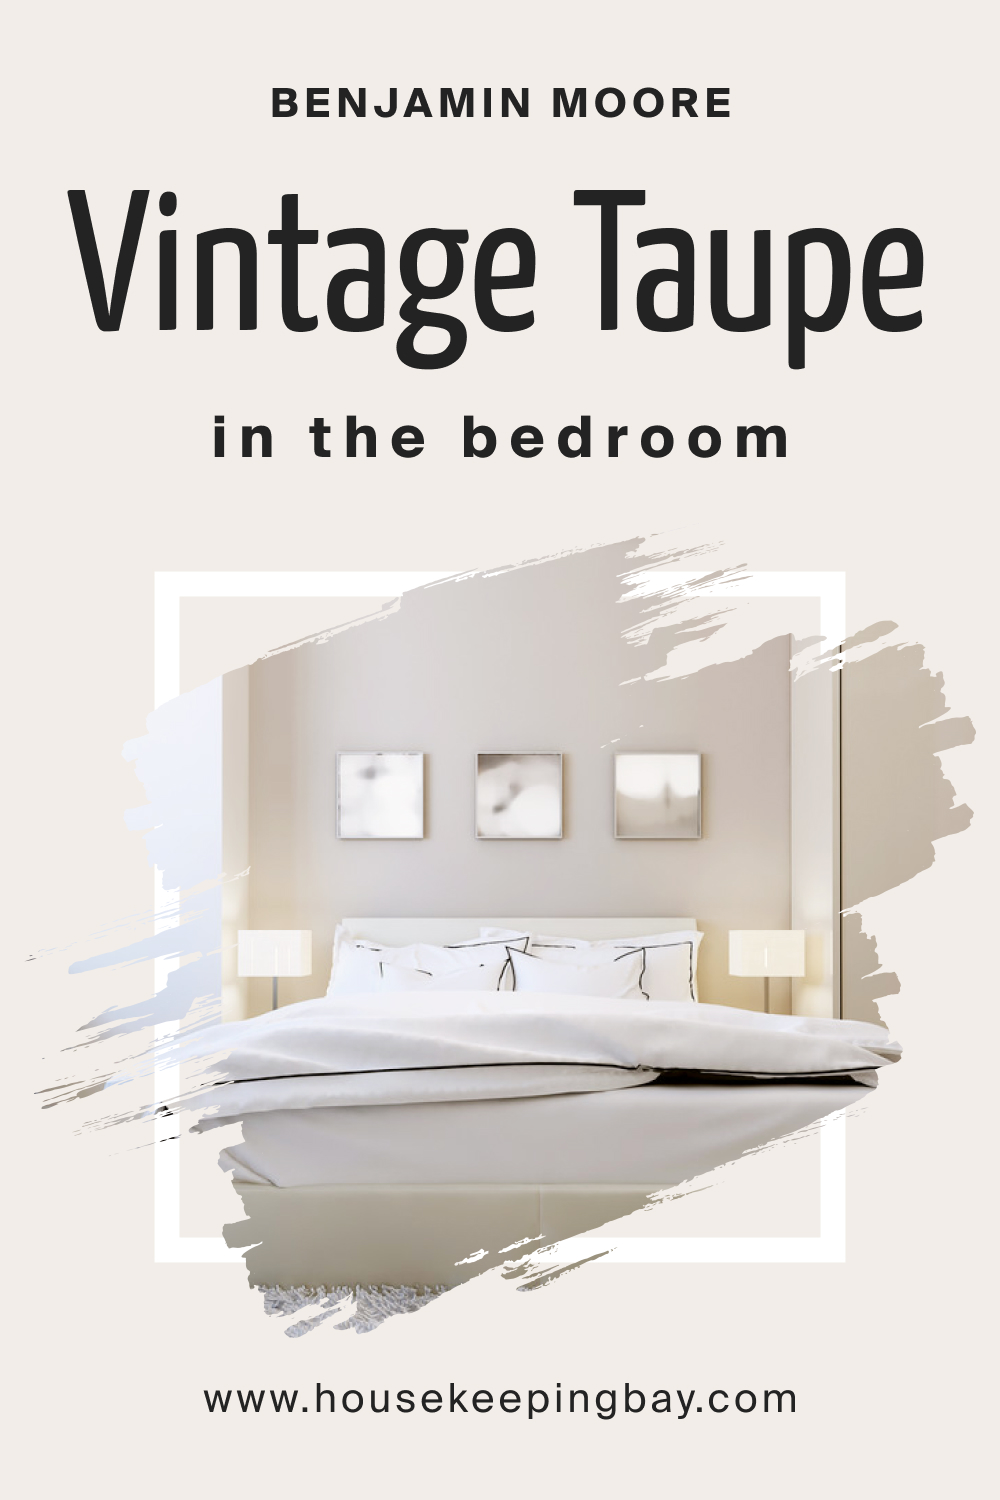 Benjamin Moore. Vintage Taupe 2110 70 for the Bedroom